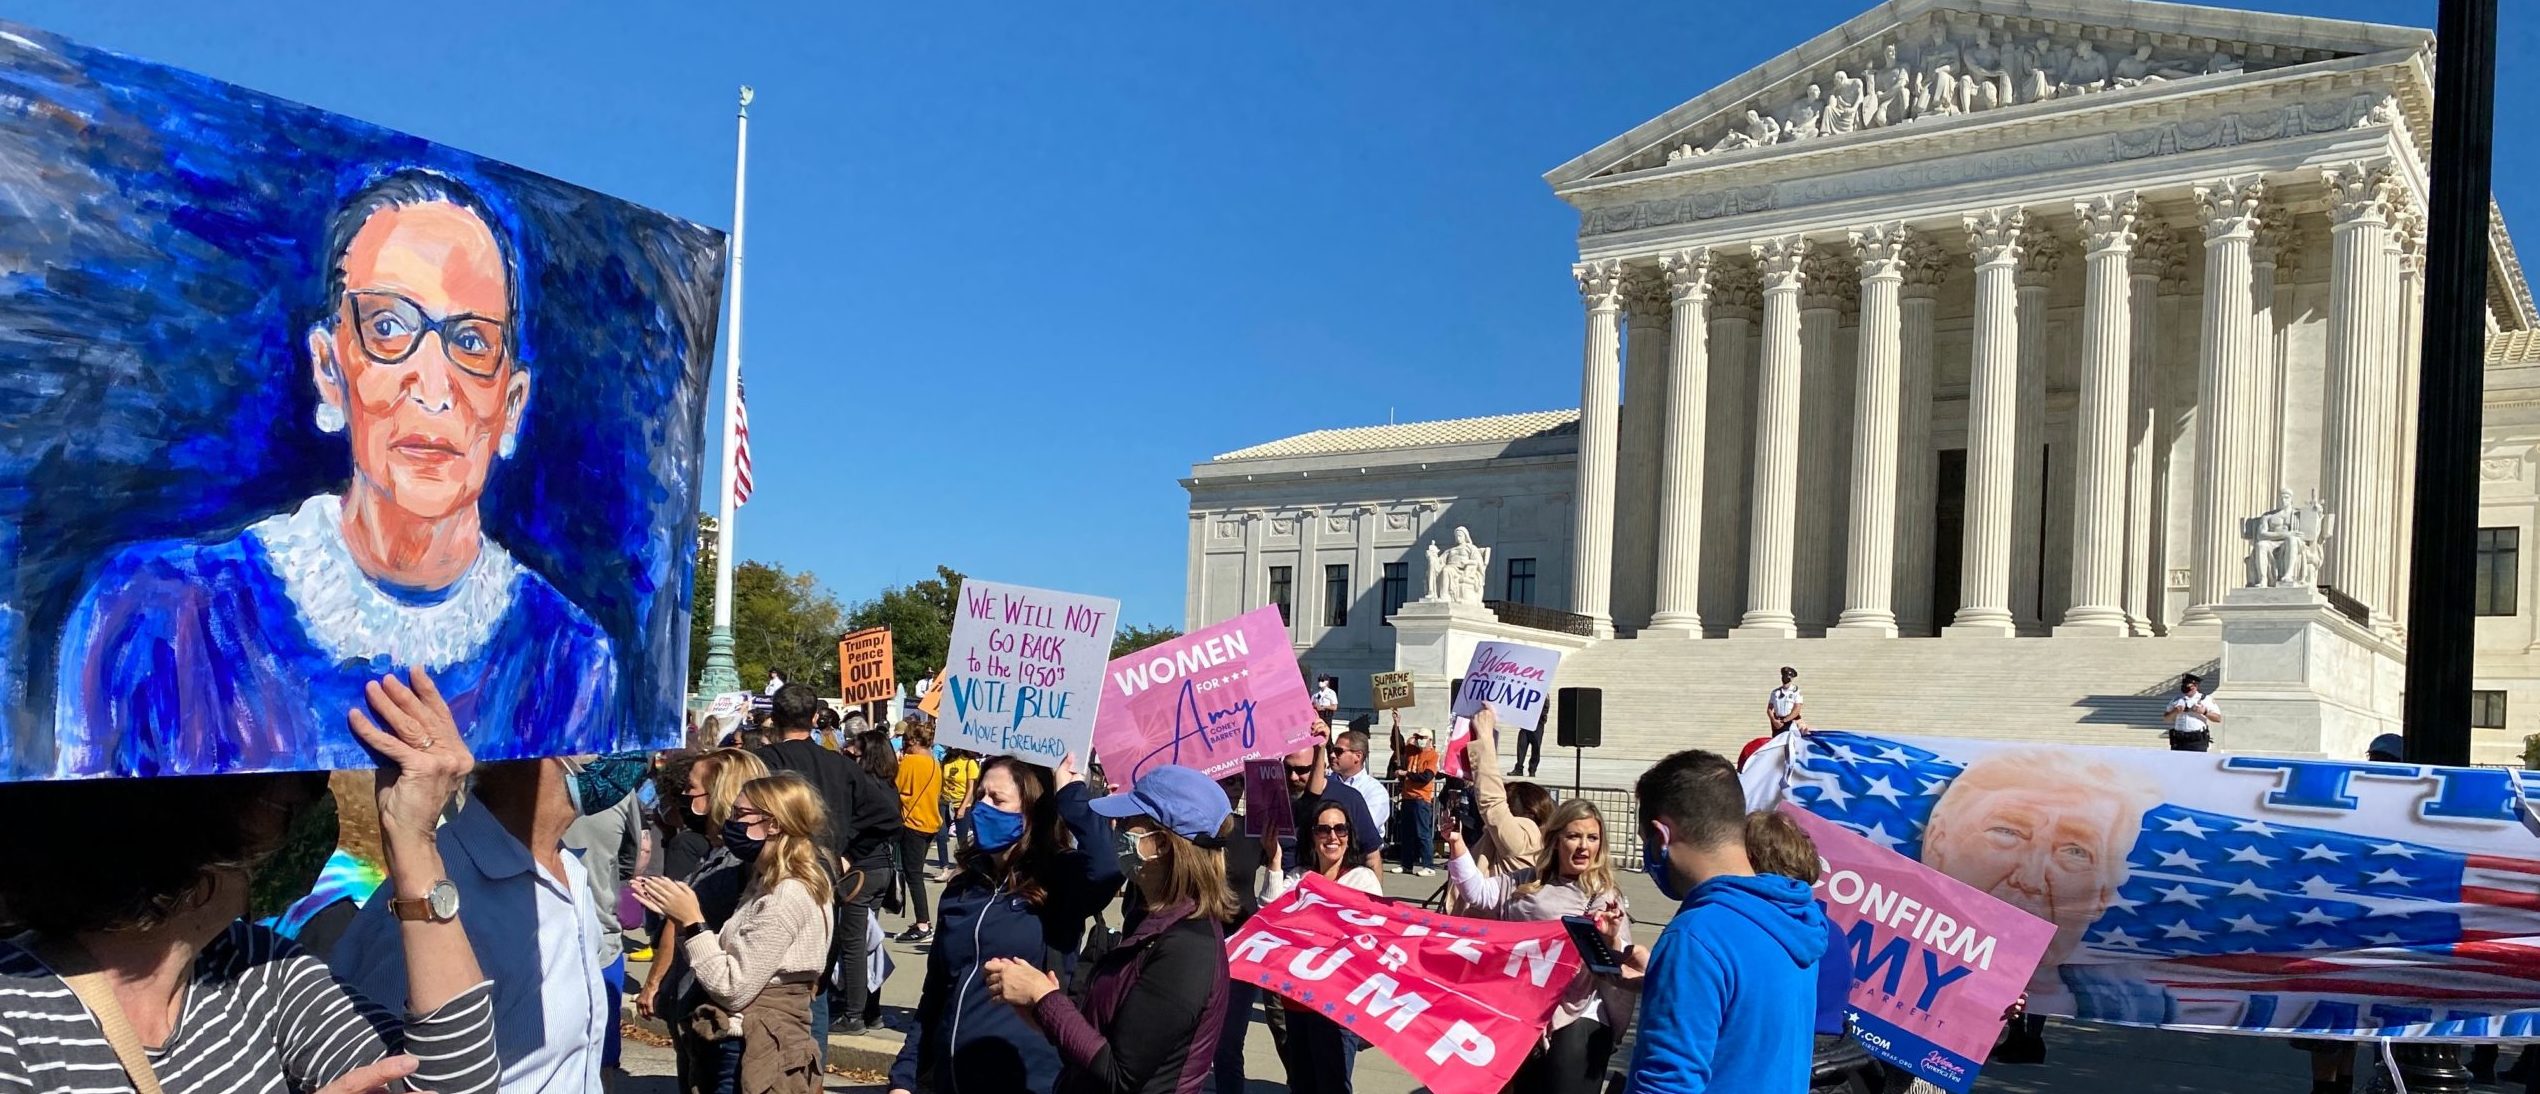 Demonstrators march past the Supreme Court in the nationwide Women's March on October 17, 2020, in Washington, DC. (Photo by Daniel SLIM / AFP) (Photo by DANIEL SLIM/AFP via Getty Images)